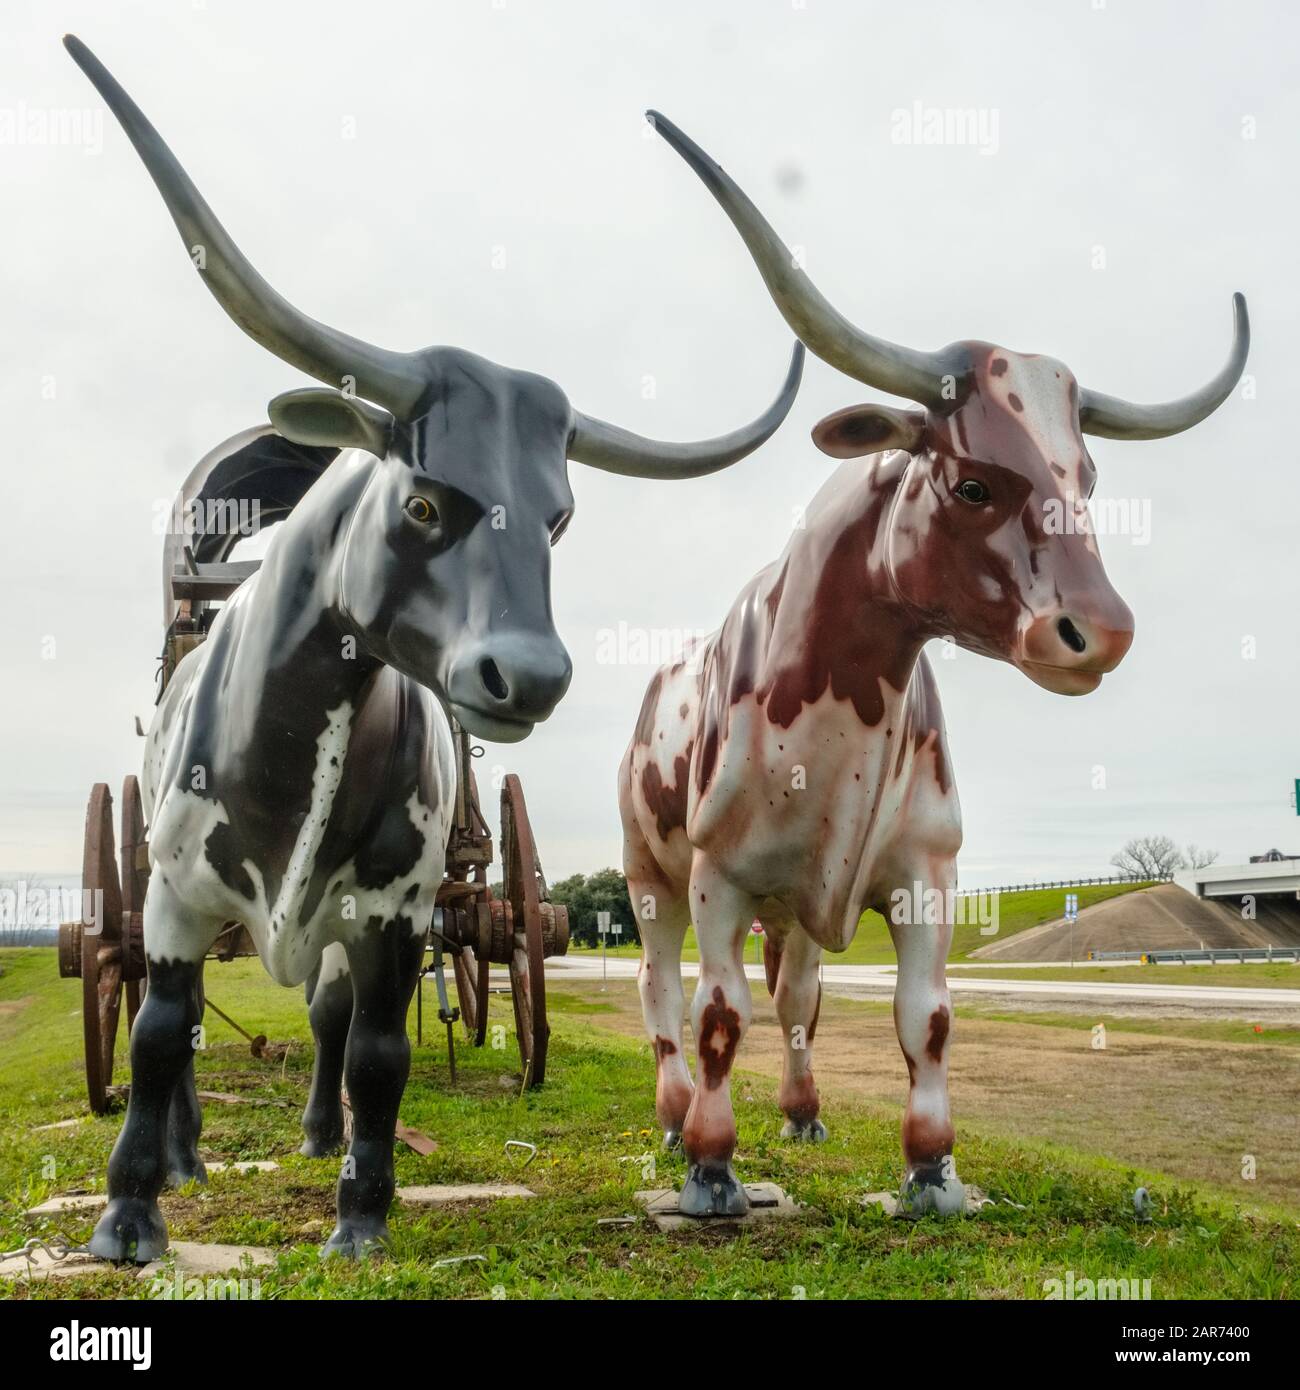 Replicas of longhorn cattle used to pull American pioneer covered wagons westward. Stock Photo